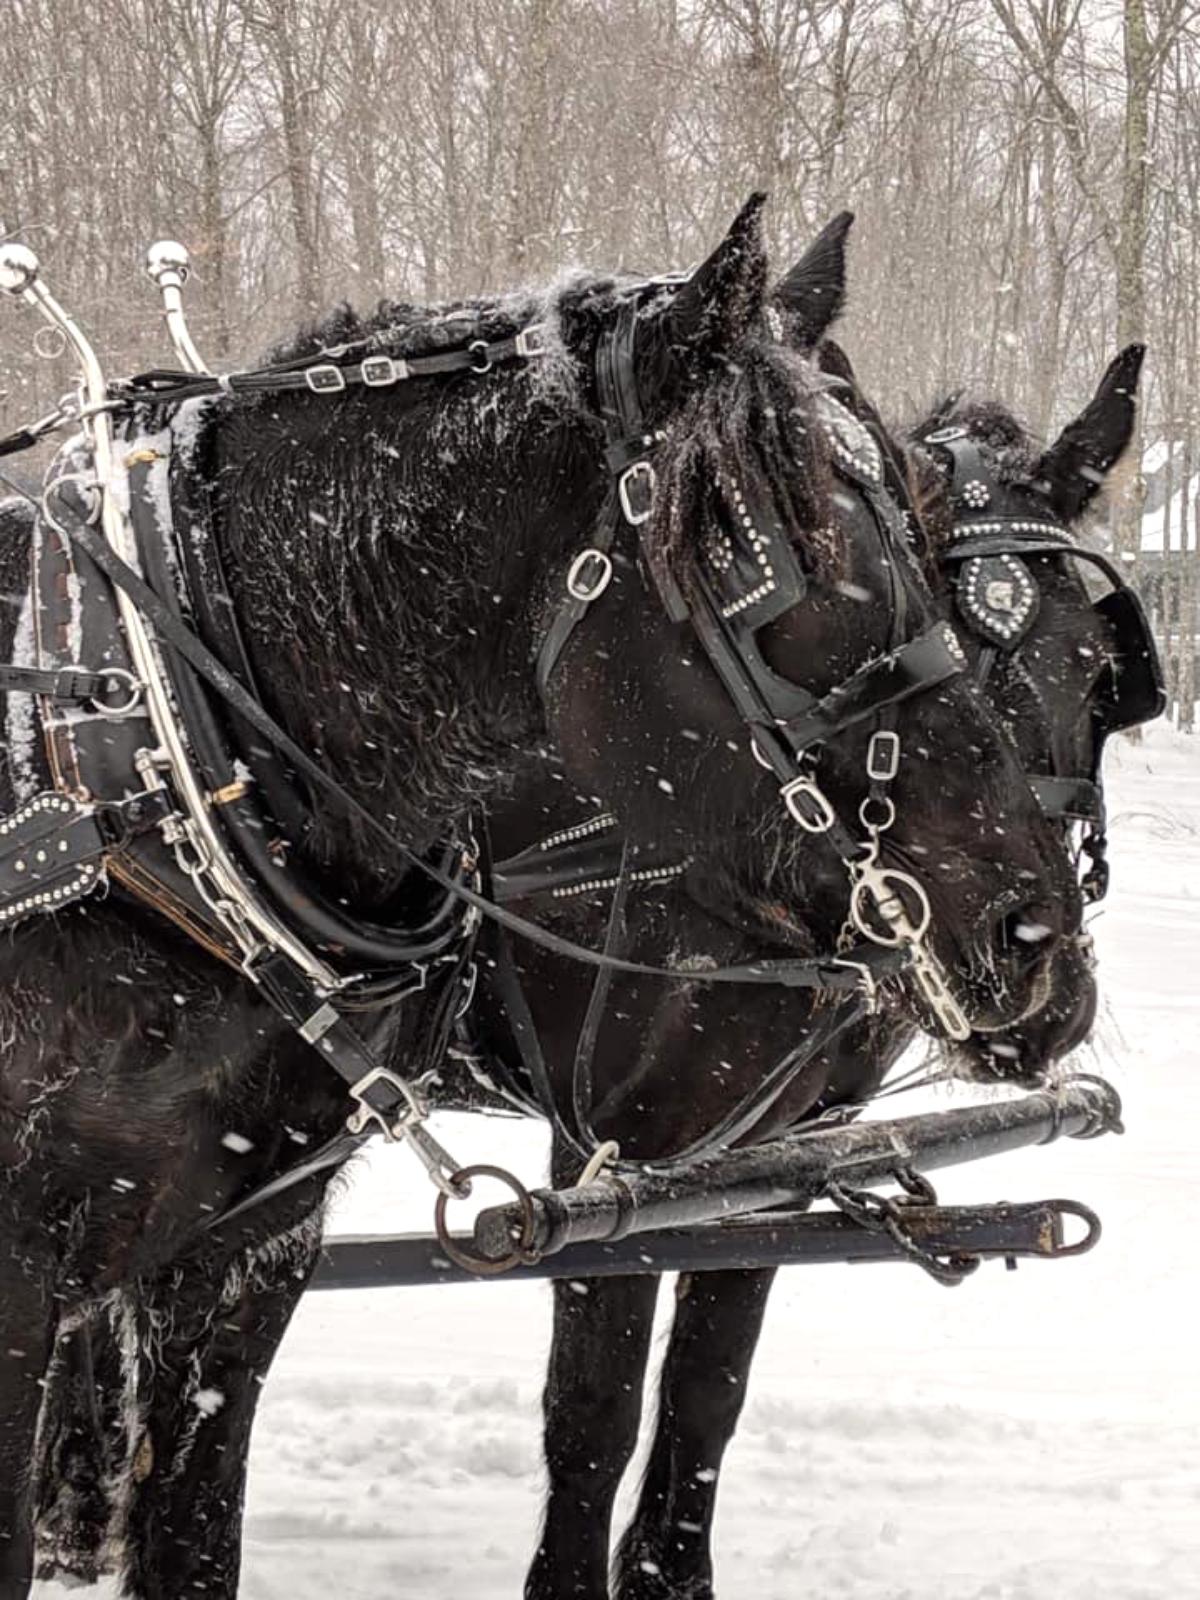 Keeping Pace with J and D Percherons: Edinburg’s Gentle Giants!